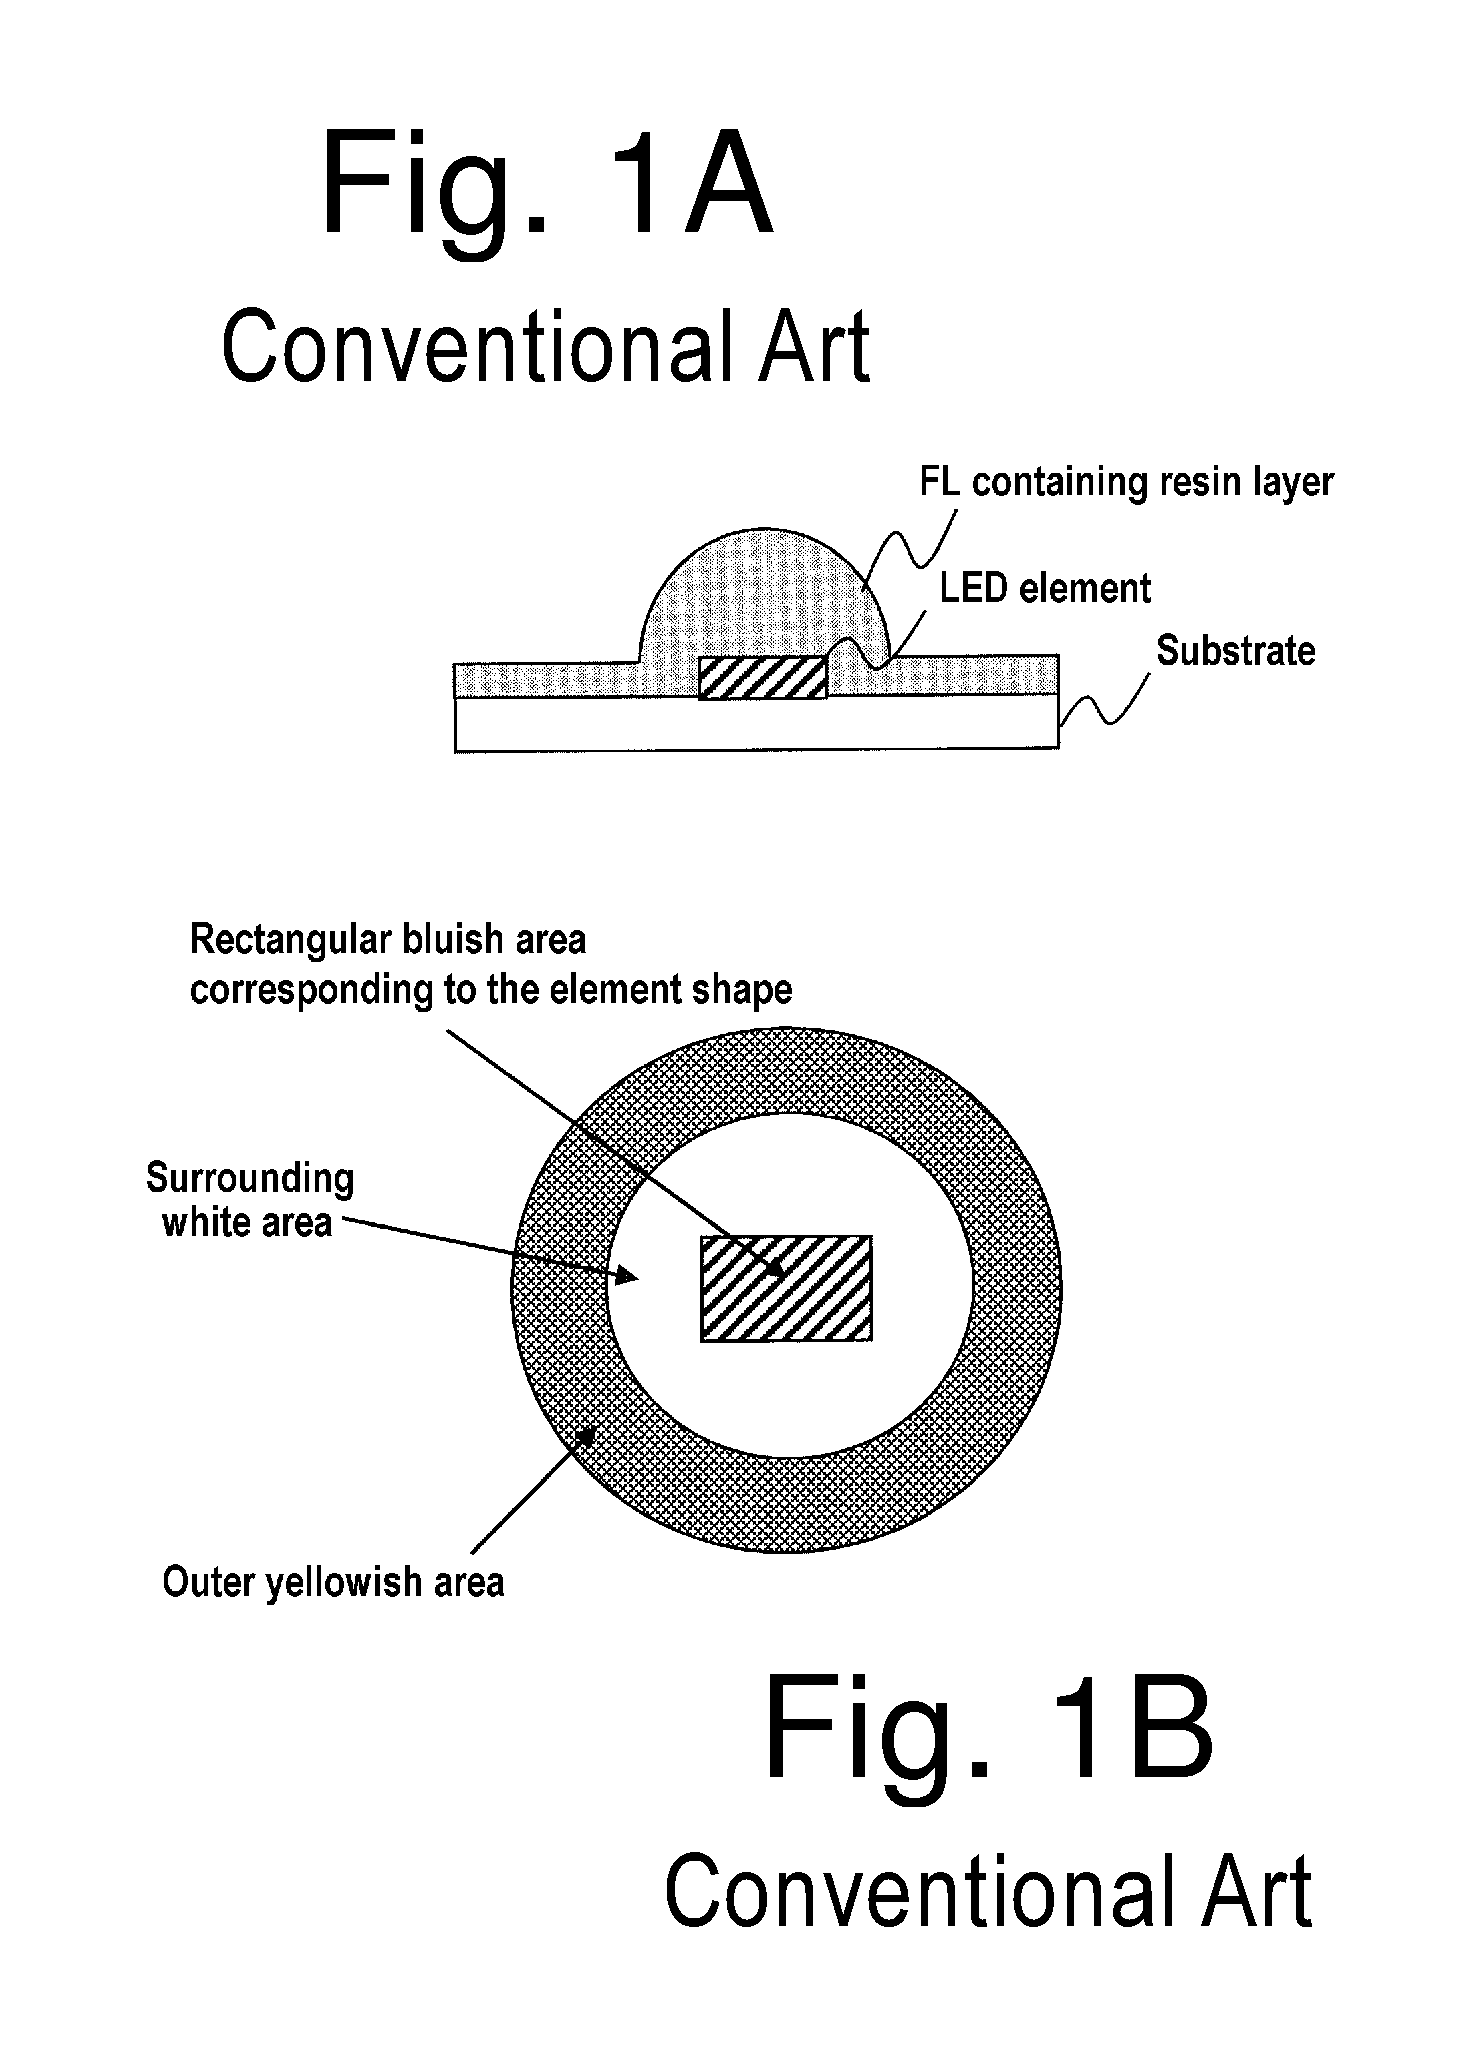 Light-emitting device, method for producing the same, and illuminating device